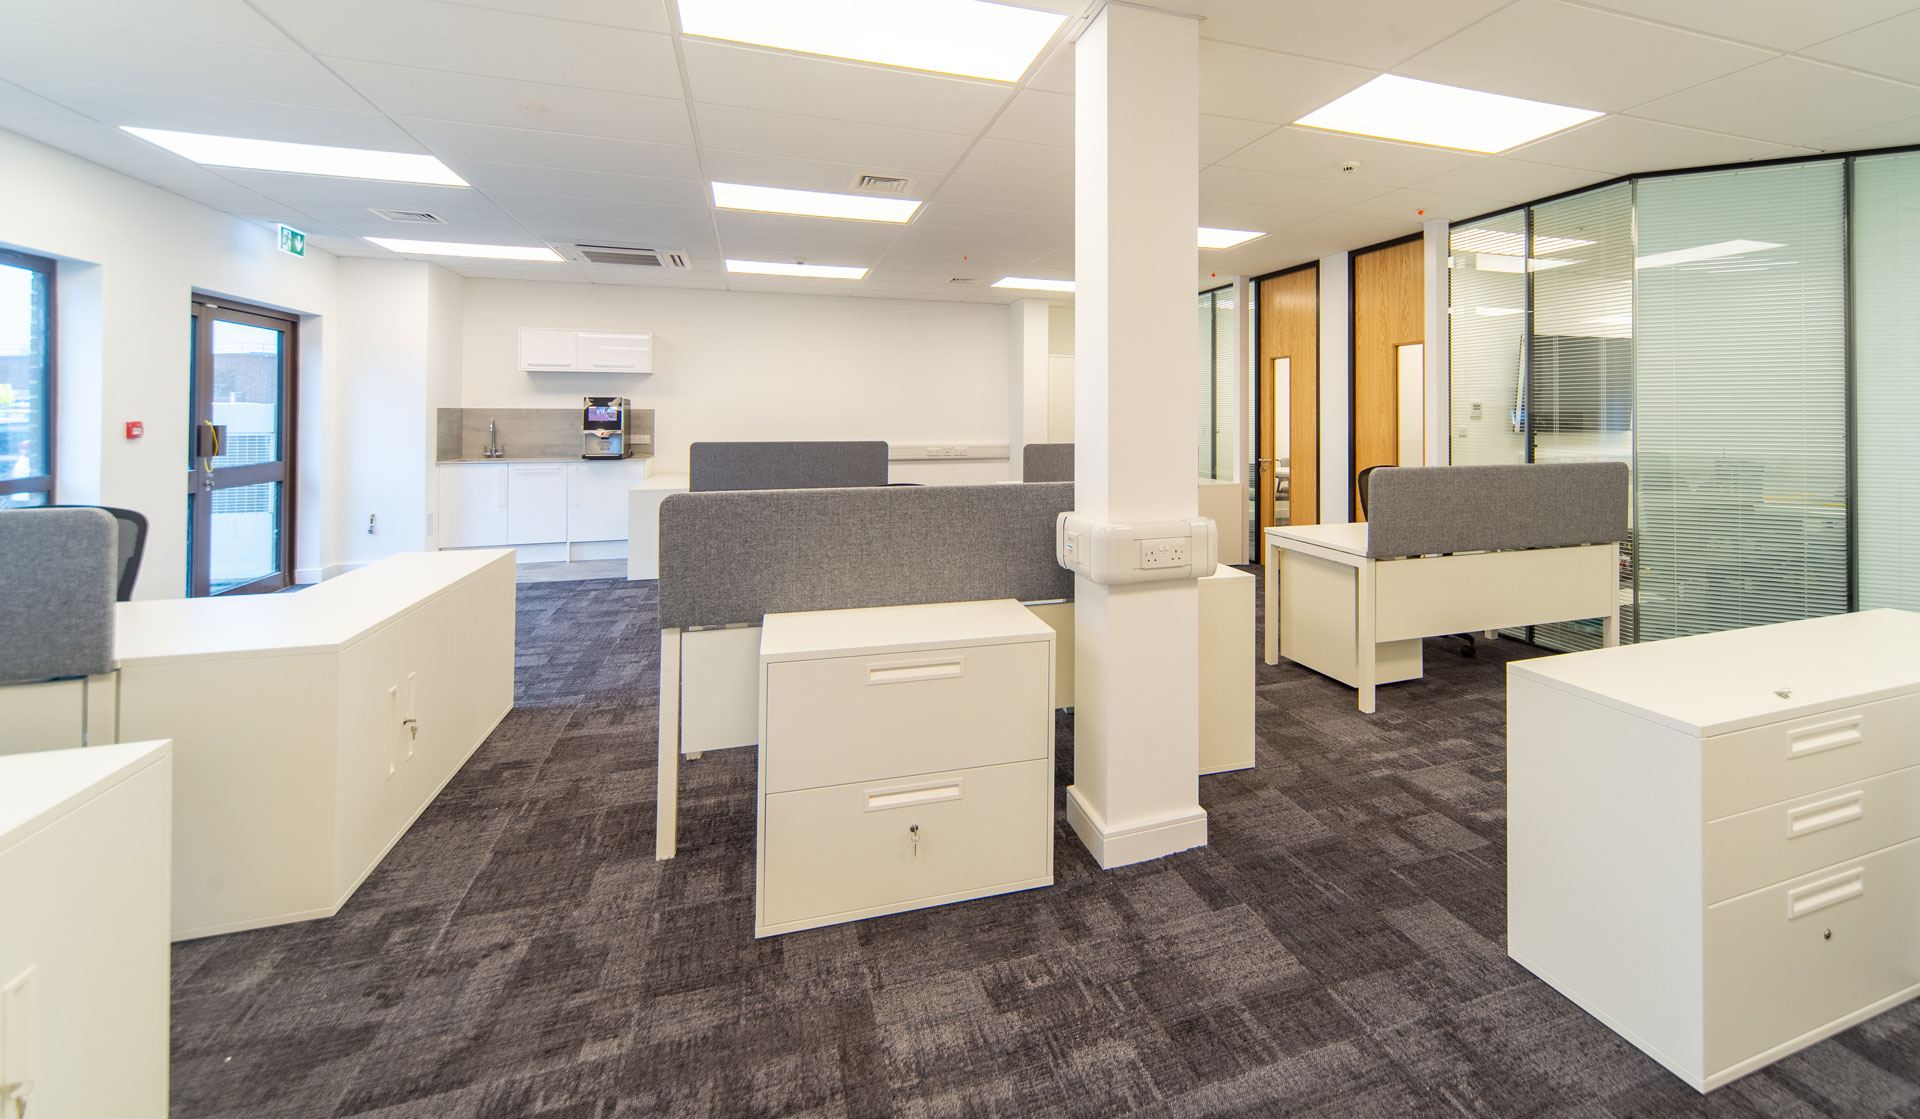 Office with Patterned Carpet, Tables, Chairs and Storage Cabinets